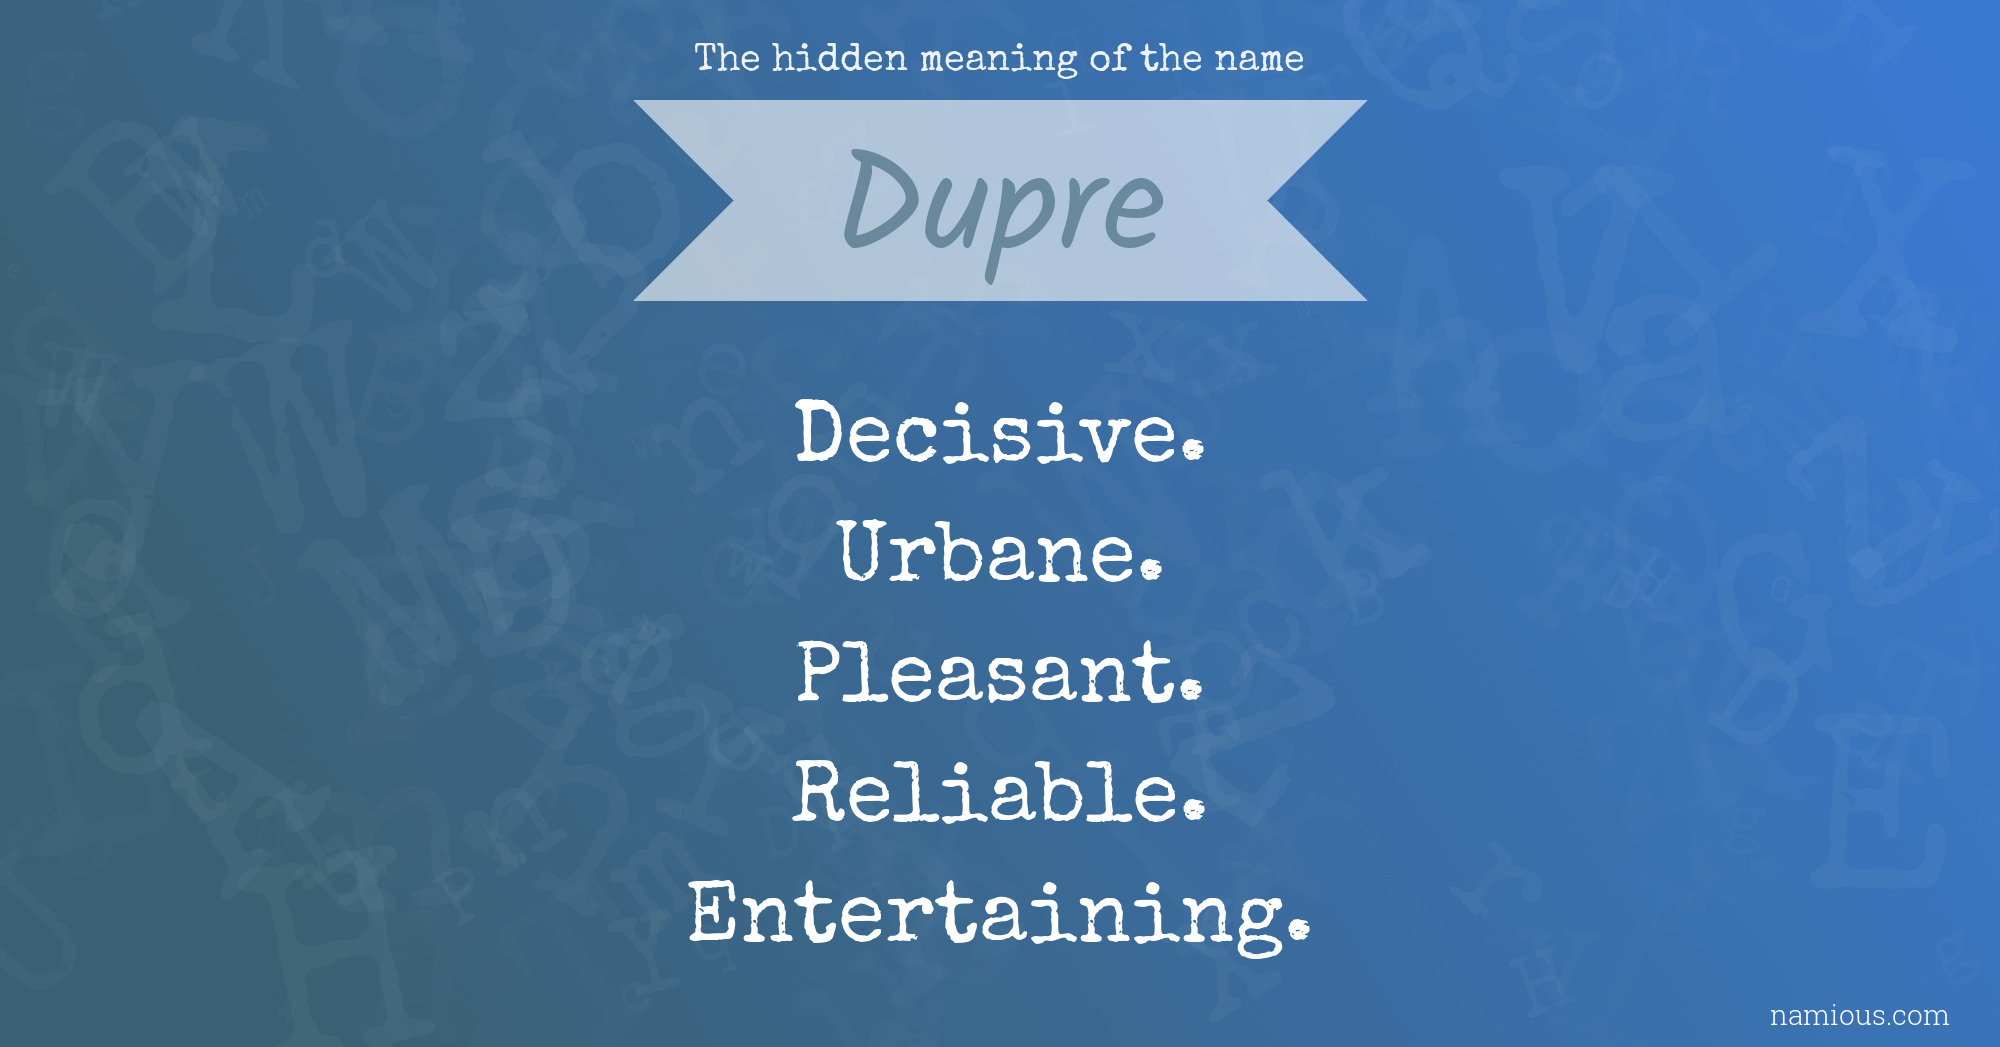 The hidden meaning of the name Dupre